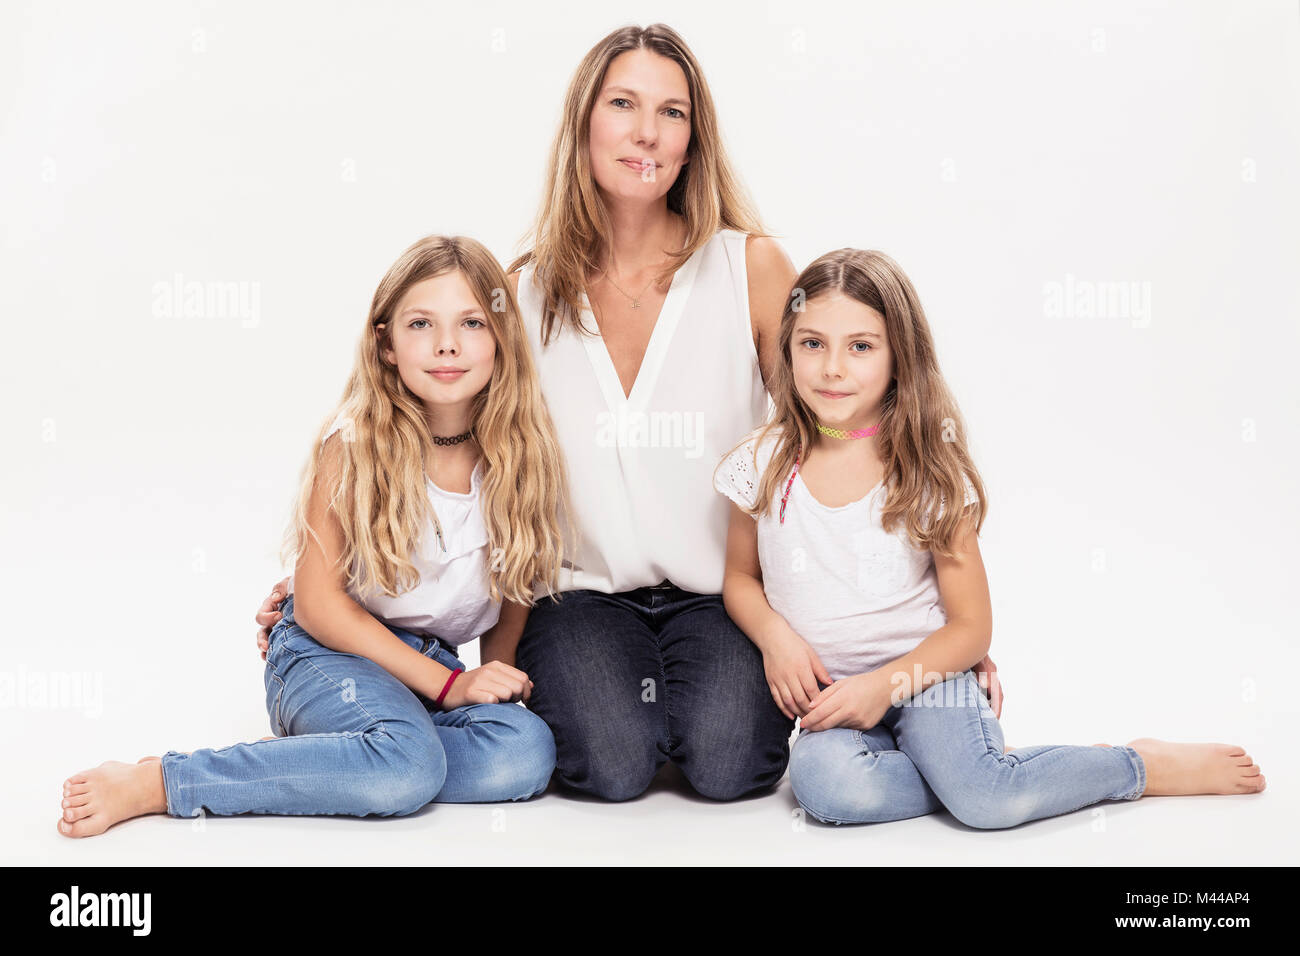 Studio portrait of mature woman with two daughters sitting on floor Stock Photo